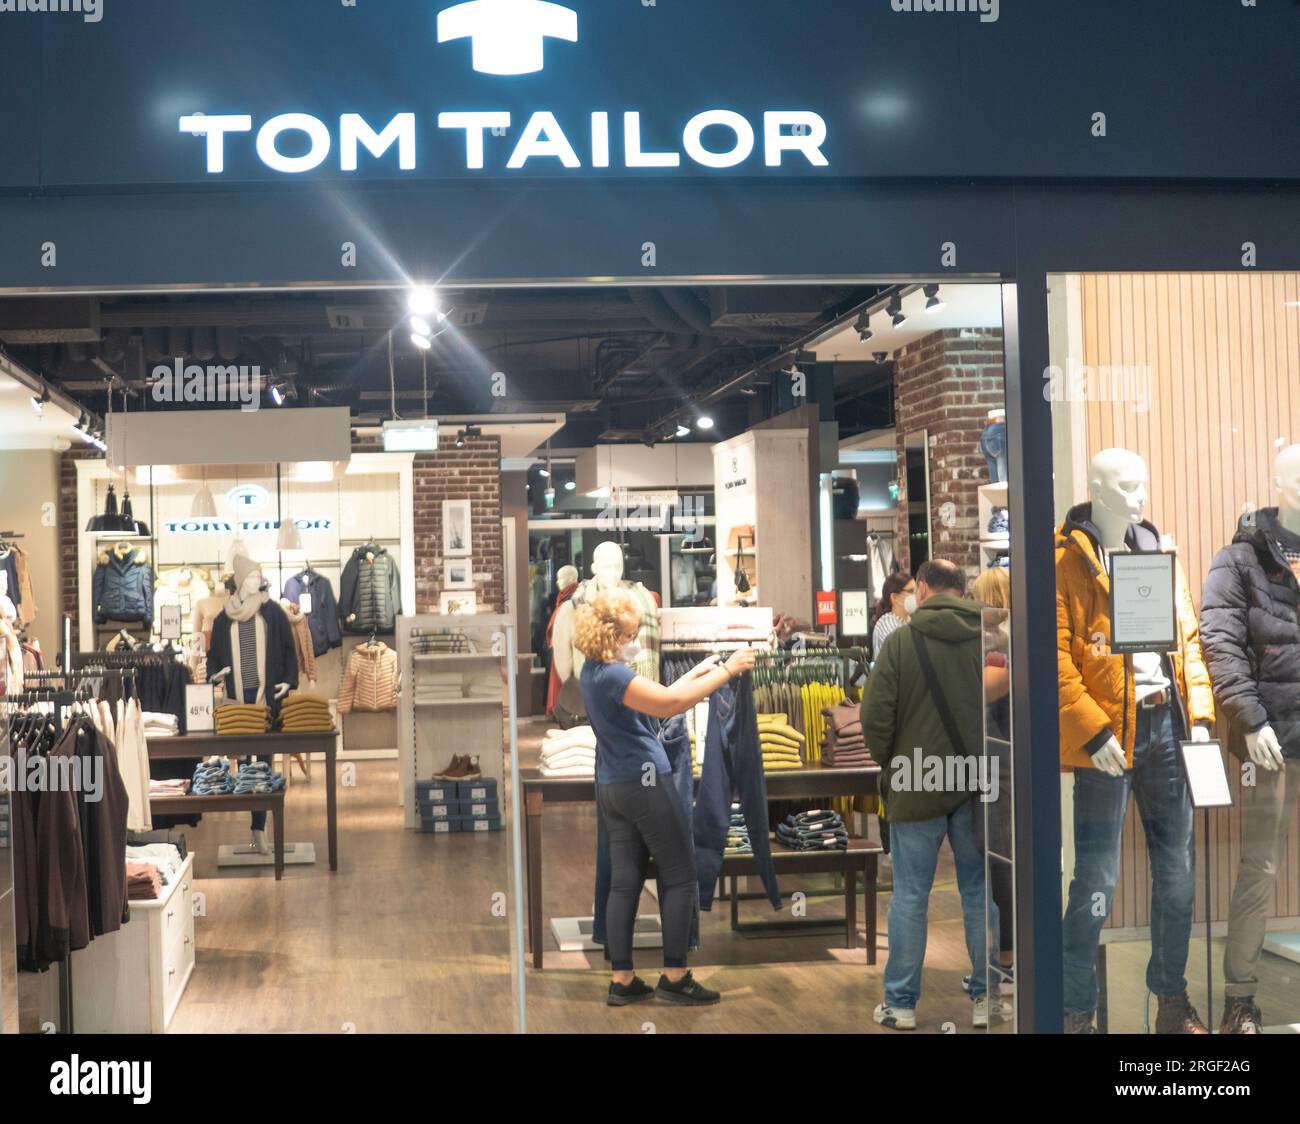 Tom images tailor logo - and photography hi-res Alamy stock